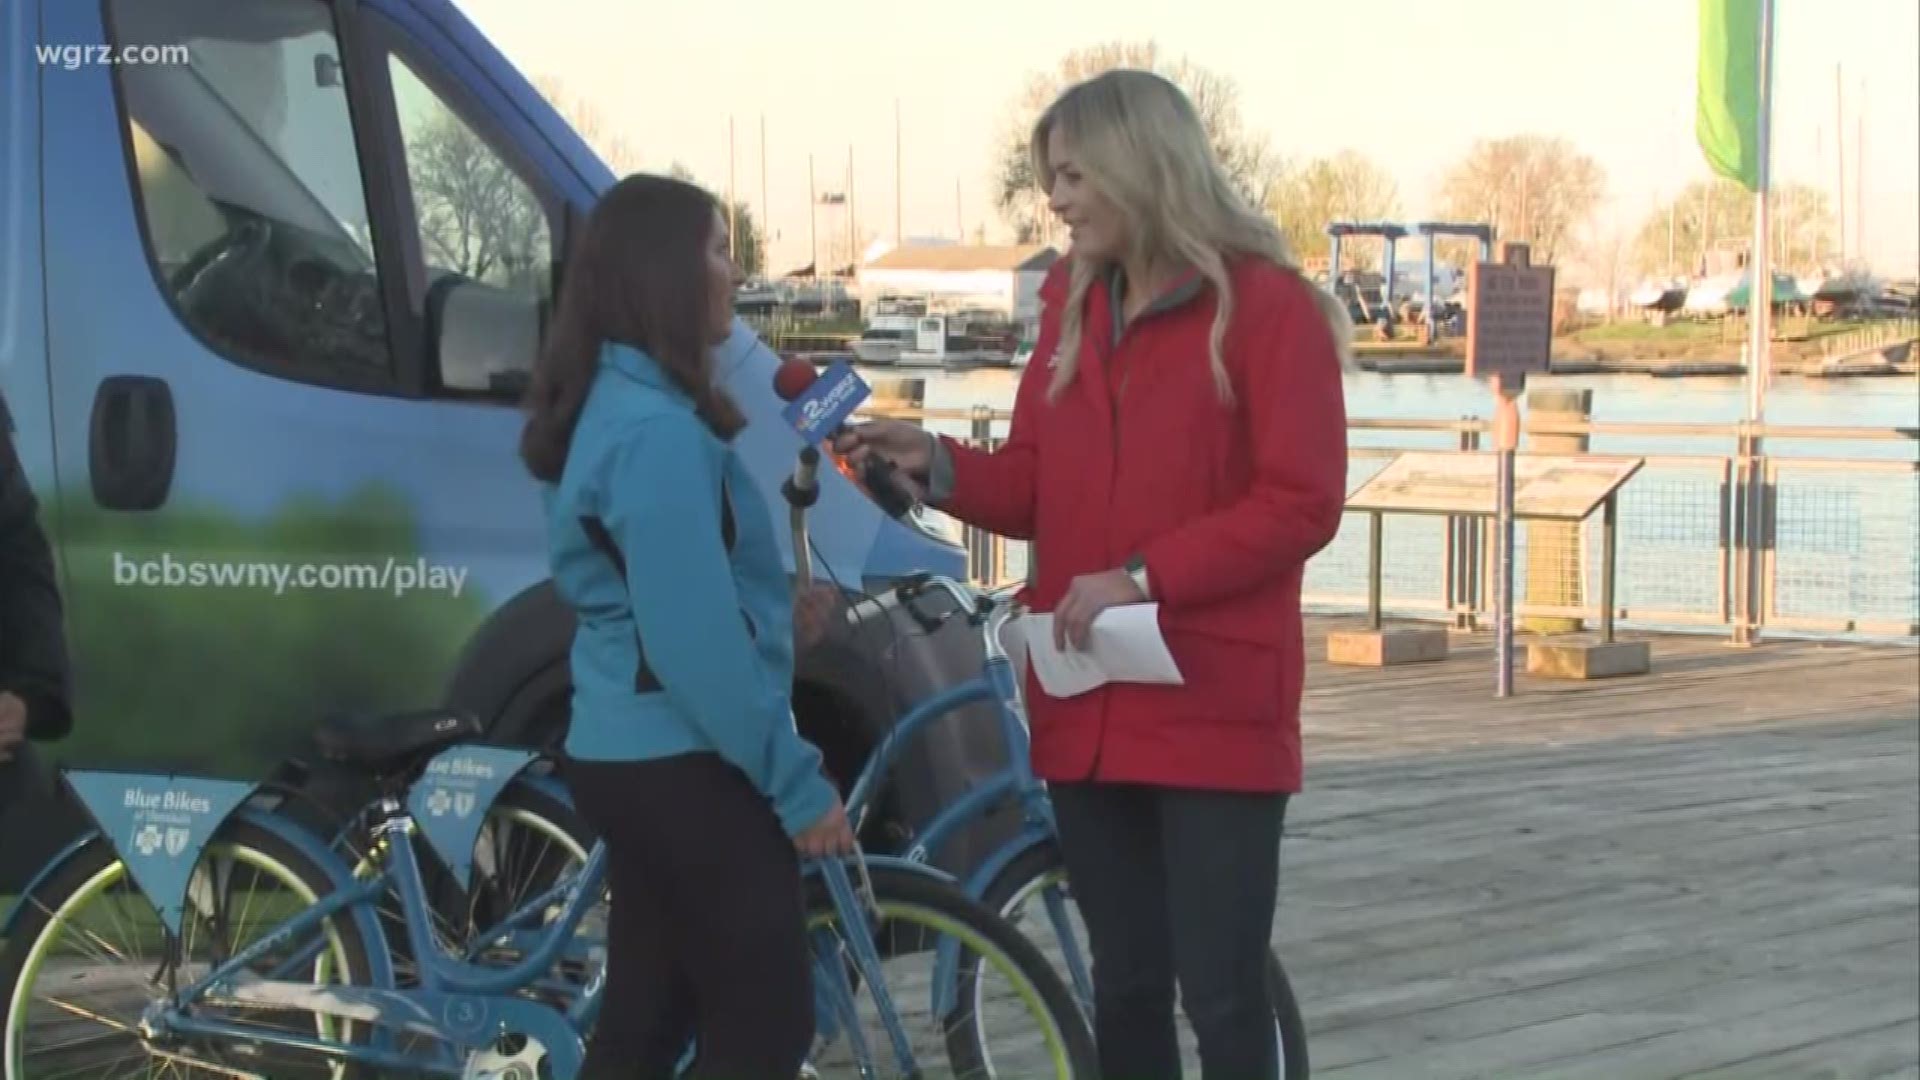 Lauren Hall gives us a look at all the fun happening this summer at Canalside